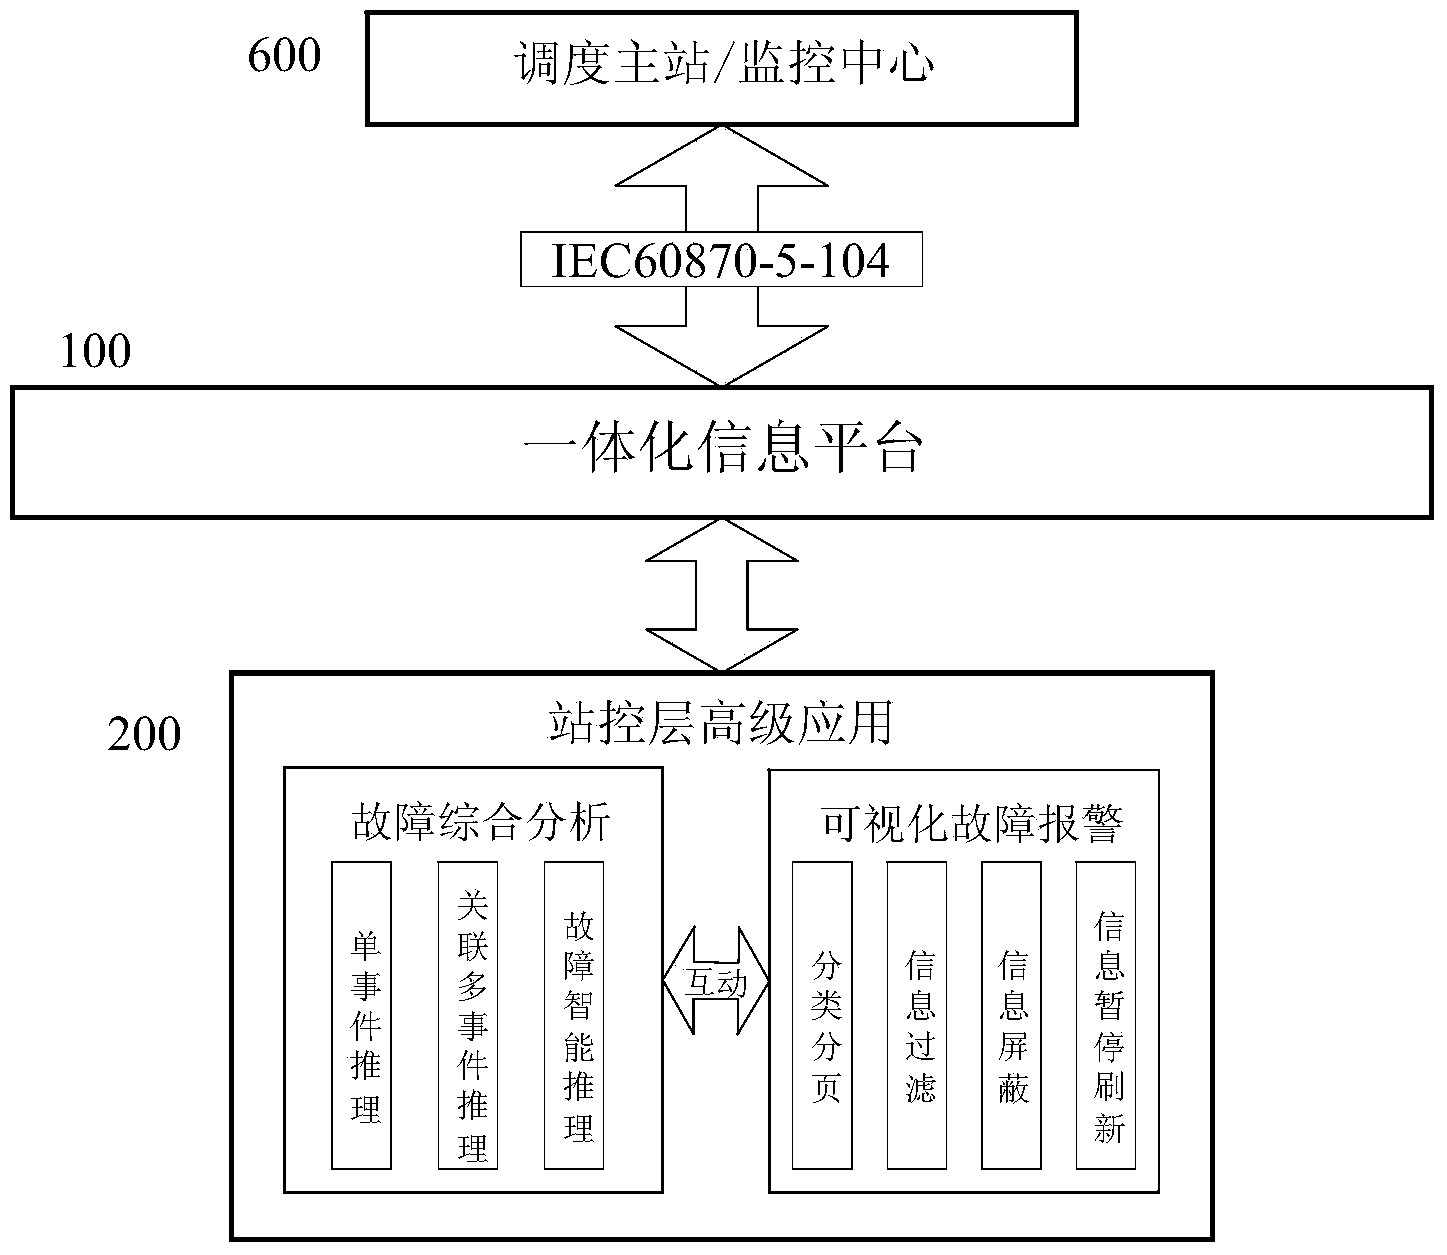 One-button type sequential control operation control method based on integrated information platform